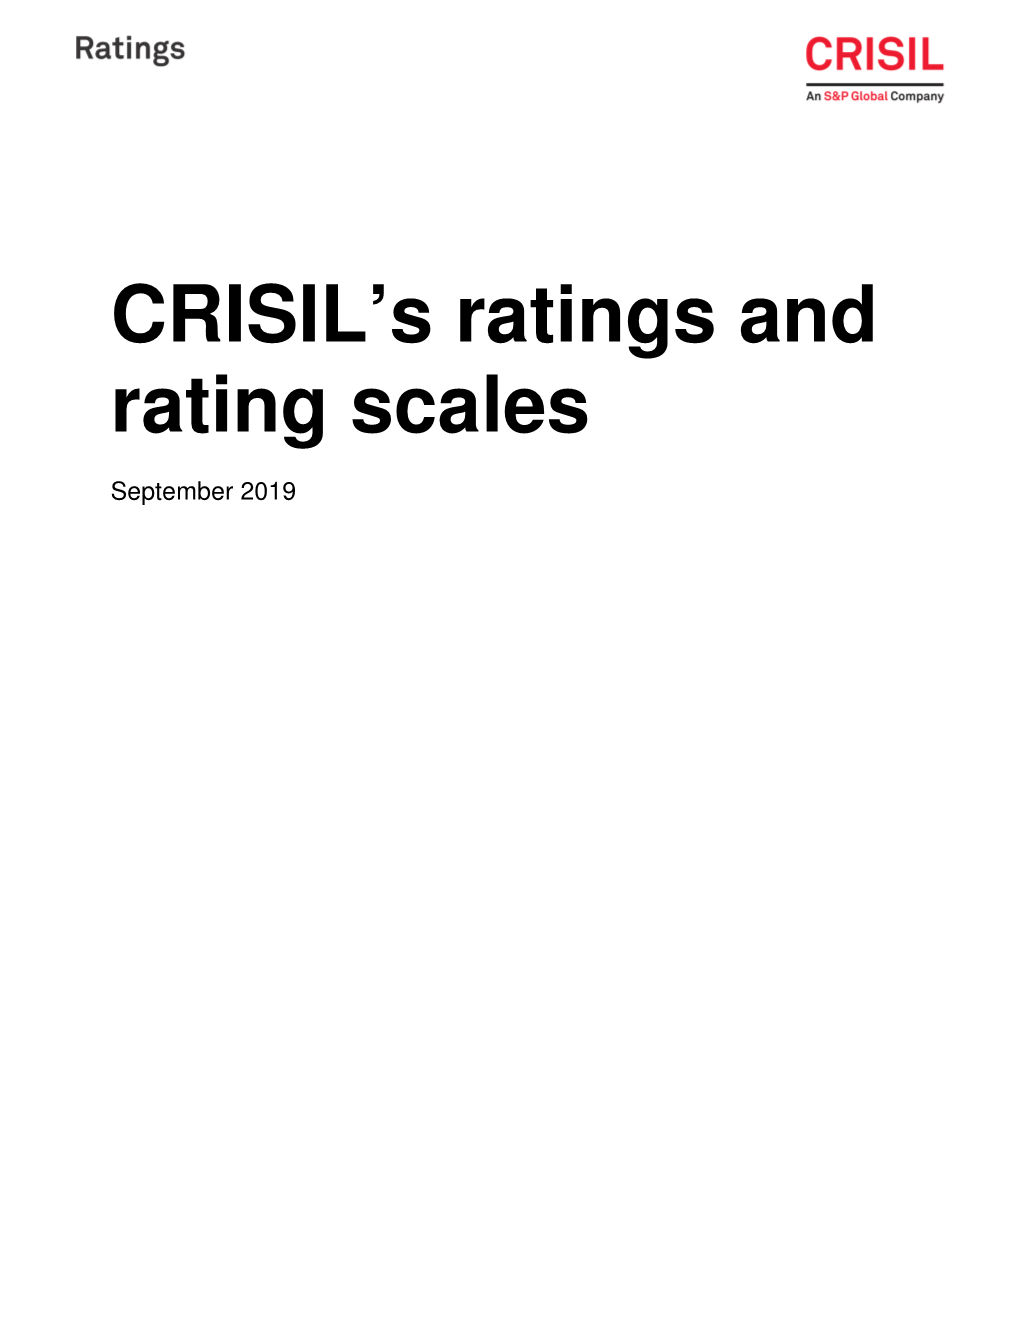 Understanding Crisils Ratings and Rating Scales